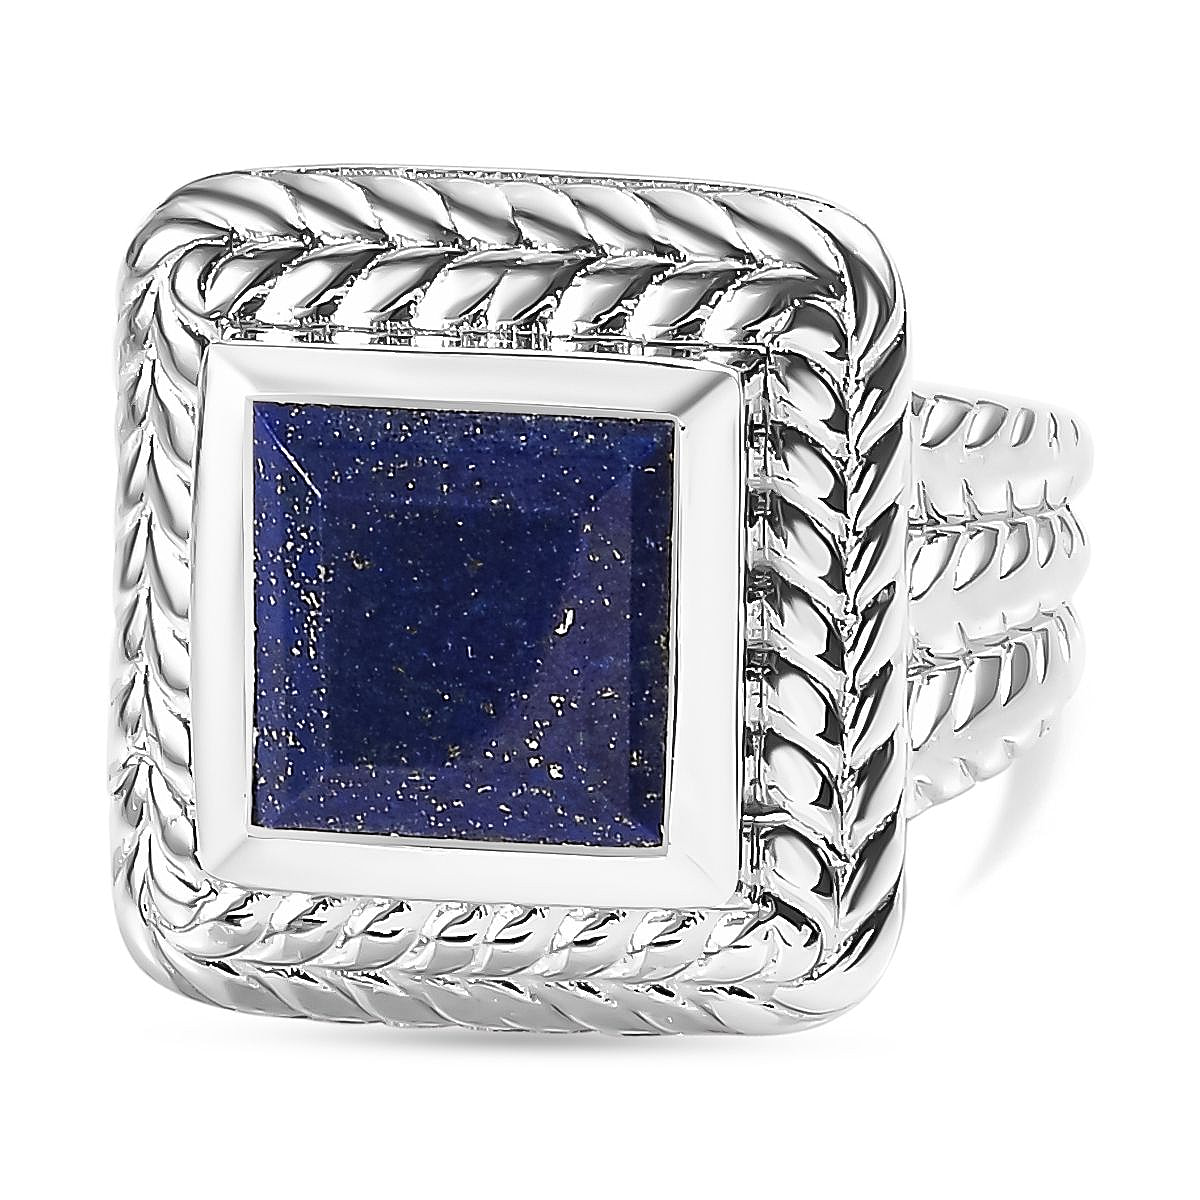 Lapis Lazuli Solitaire Halo Ring in Platinum Overlay Sterling Silver 5.04 Ct, Silver Wt. 9.0 Gms